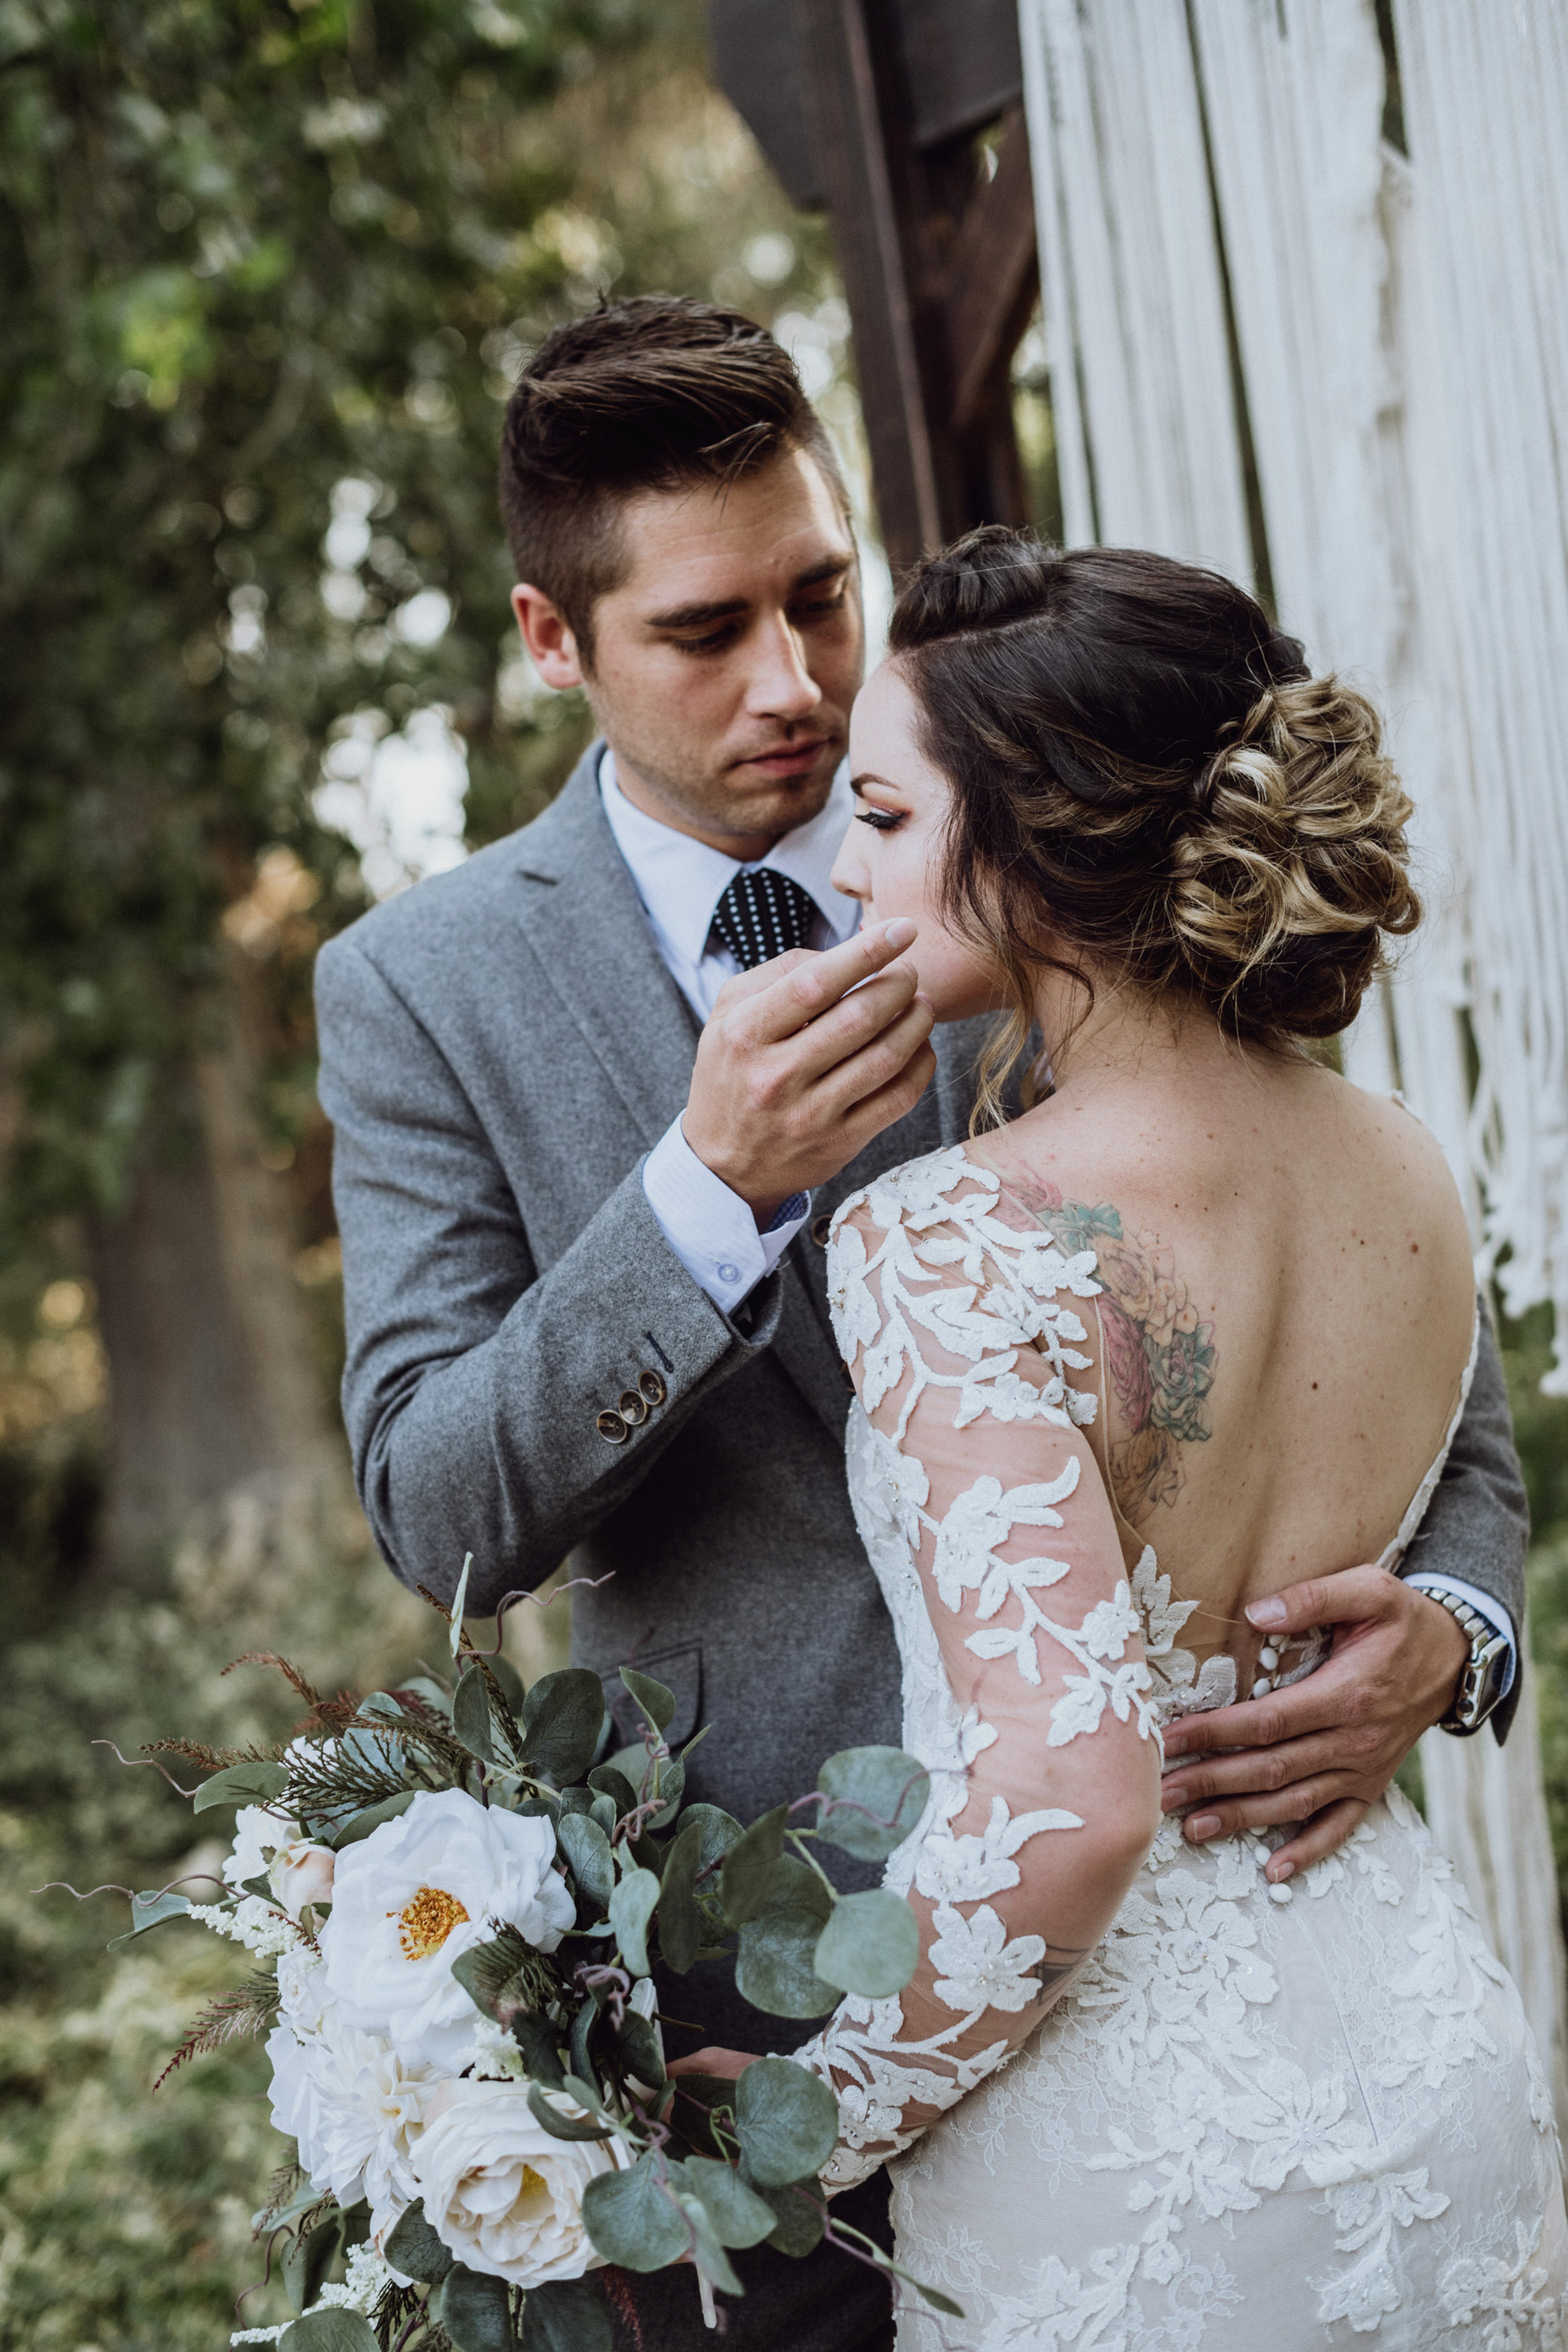 Groom touching brides face in front macrame